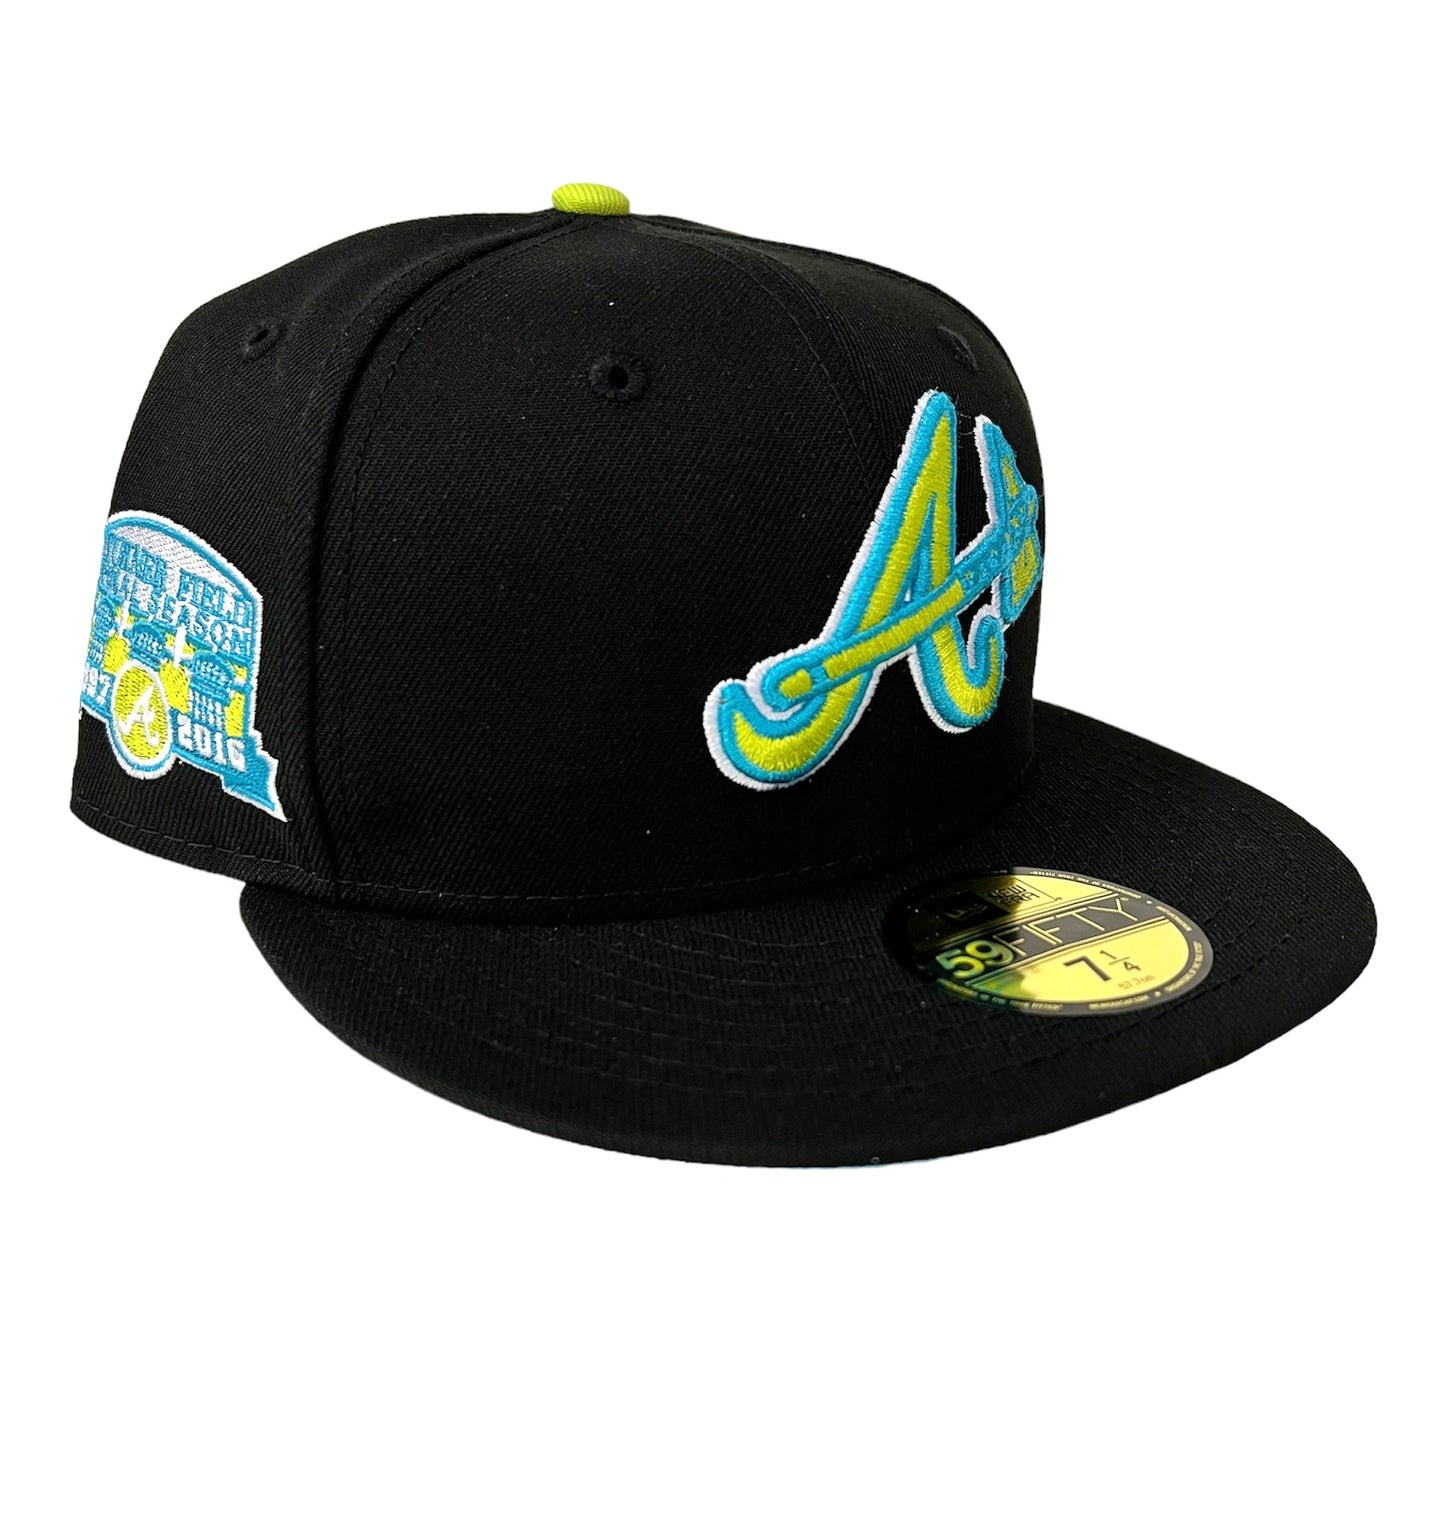 Atlanta Braves Turner Field Side Patch Exclusive Fitted Cap